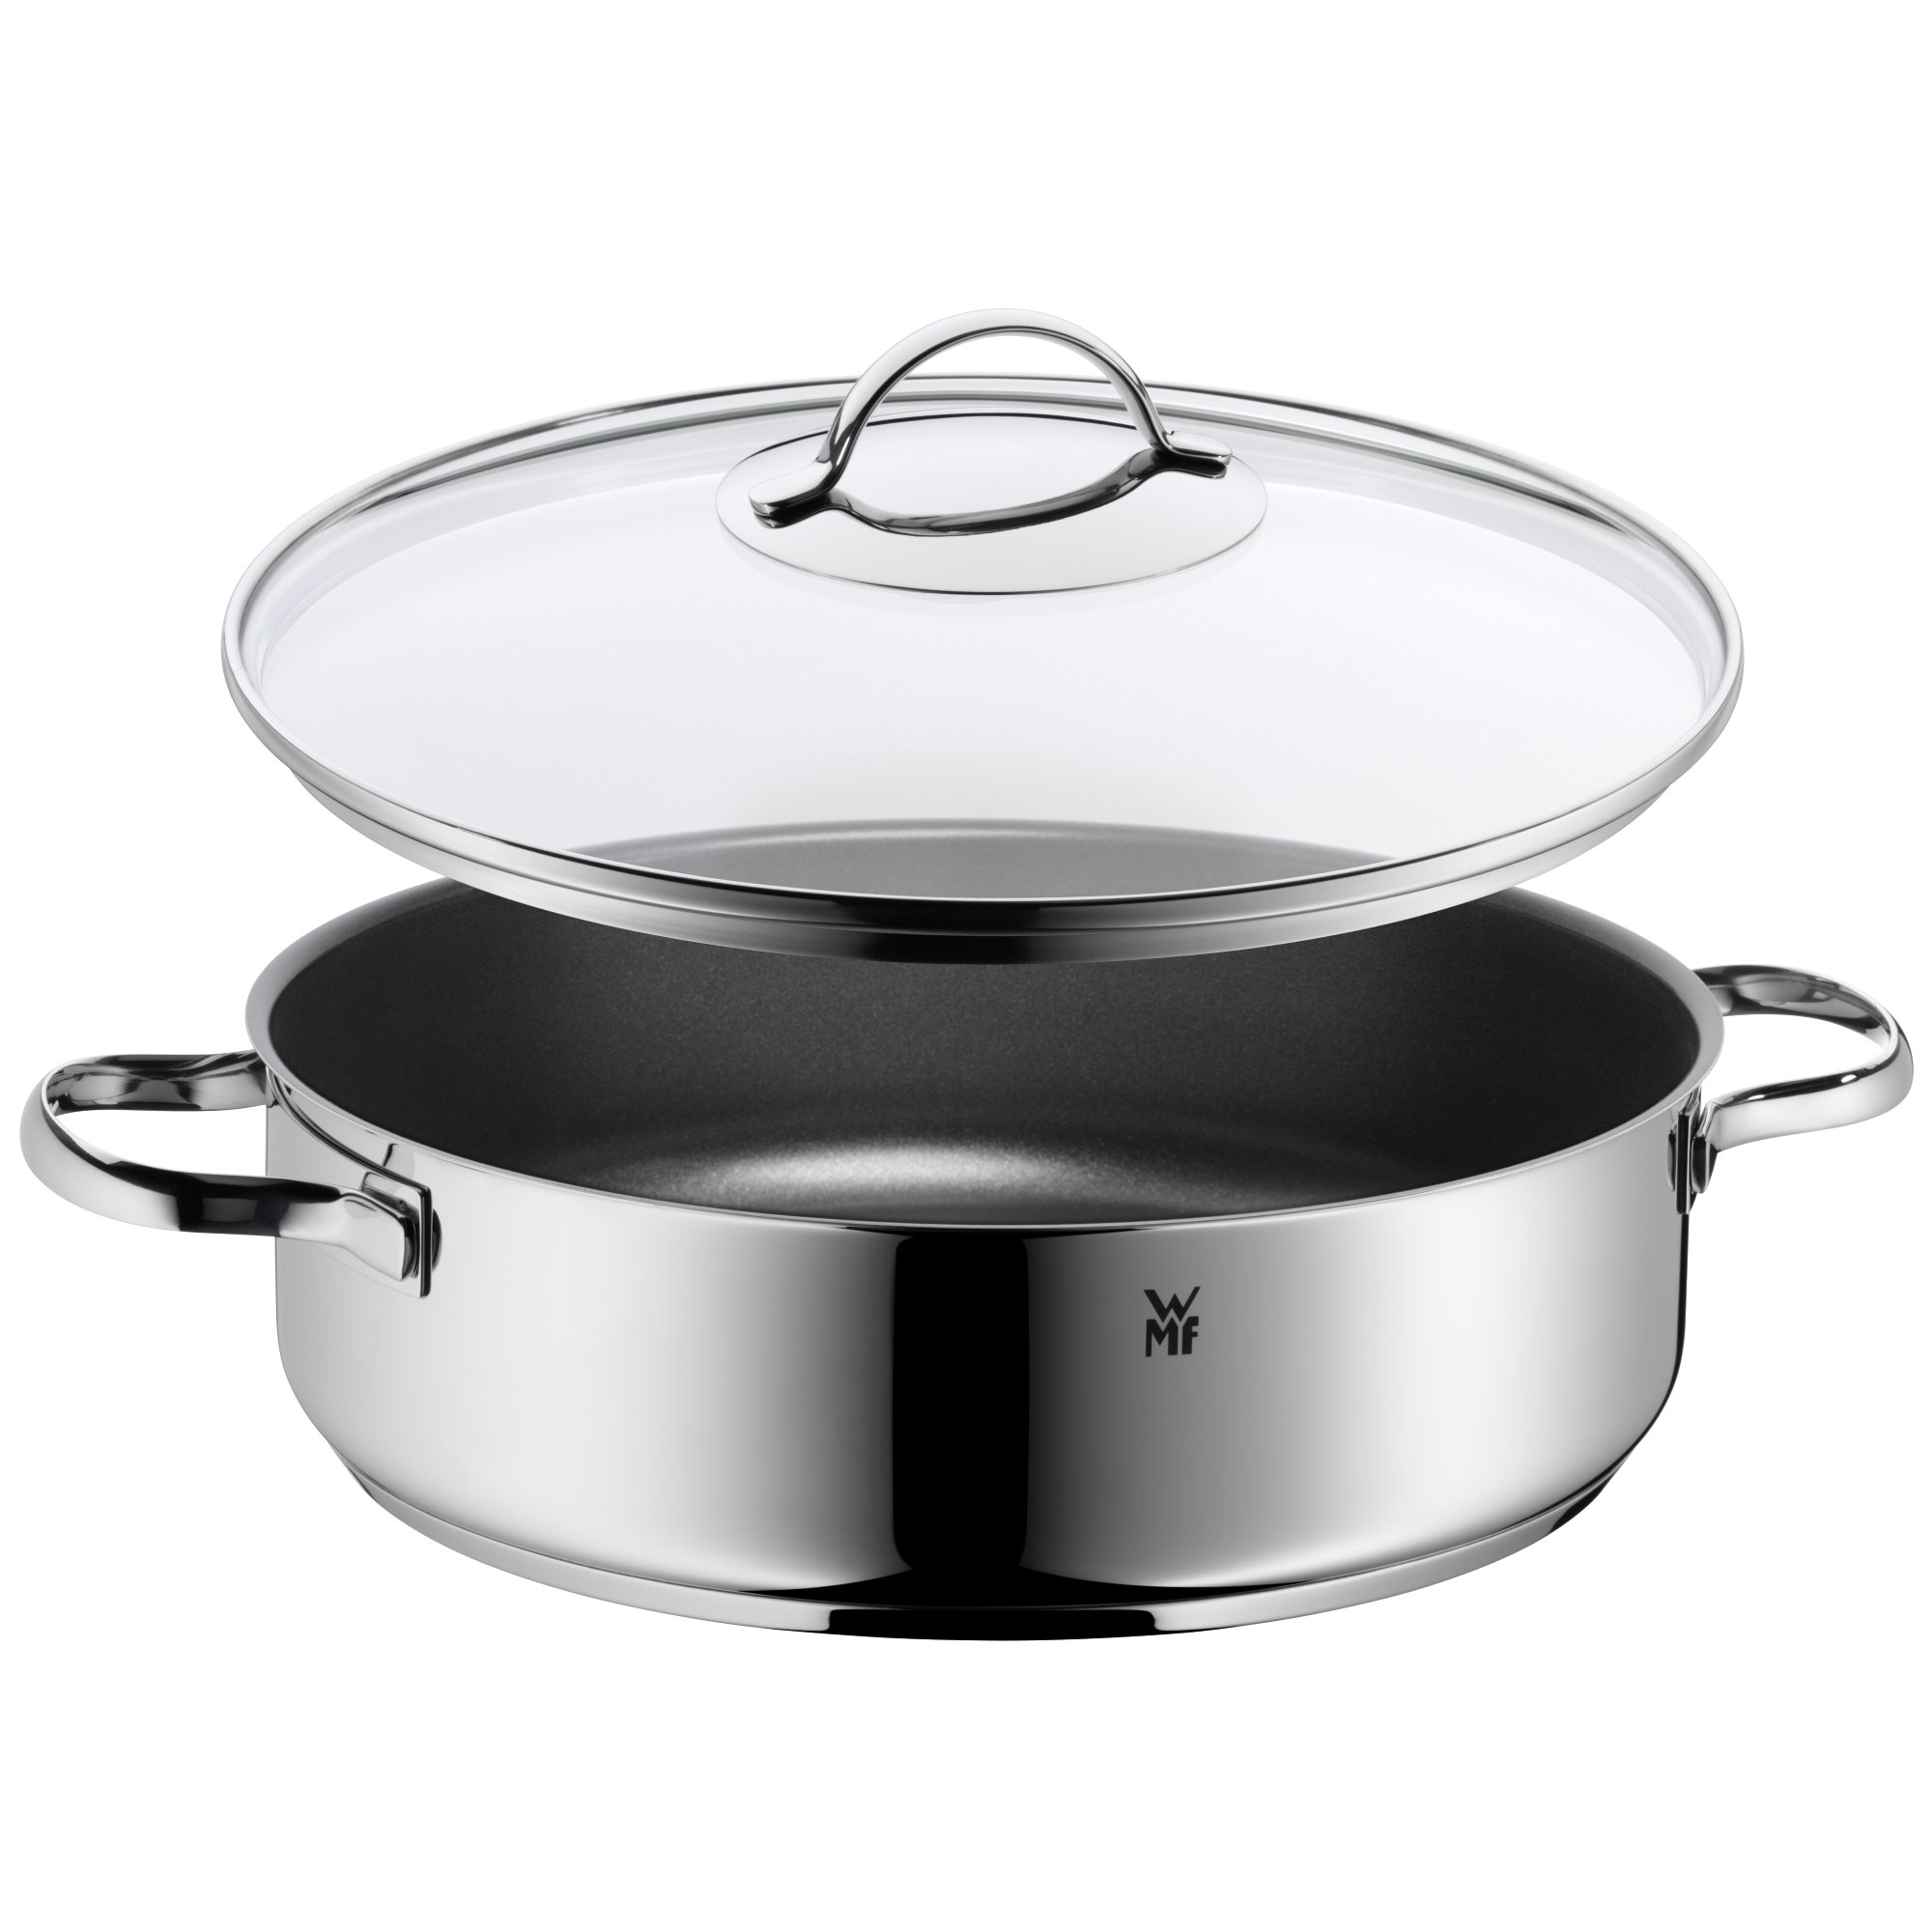 WMF non-stick stew pot serving pot for stew with glass lid 28 cm Stewing  pans Frying COOKING  BAKING 1a-Neuware Englisch